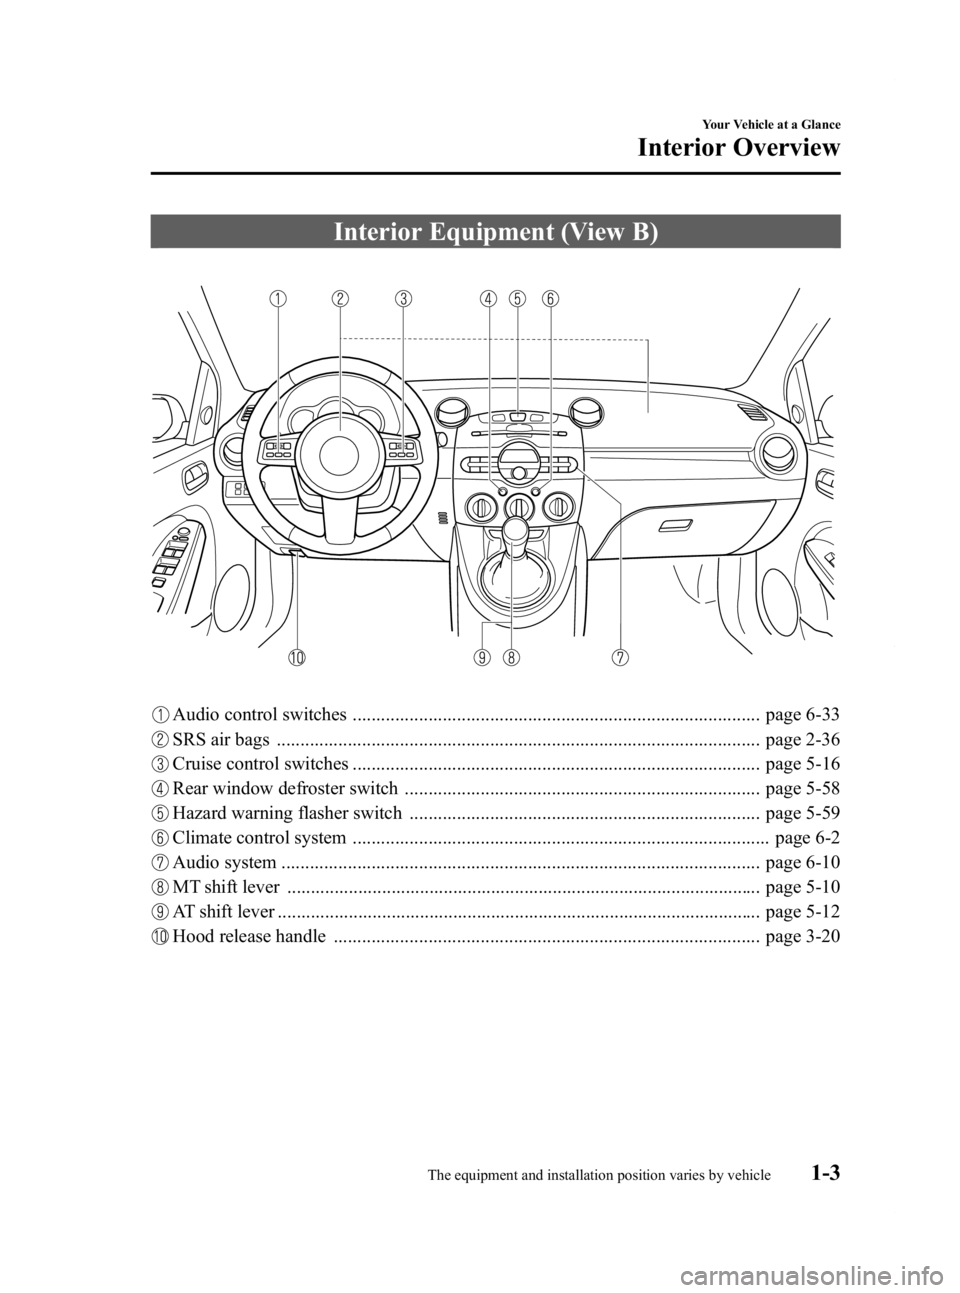 MAZDA MODEL 2 2012  Owners Manual Black plate (9,1)
Interior Equipment (View B)
Audio control switches ...................................................................................... page 6-33
SRS air bags .....................